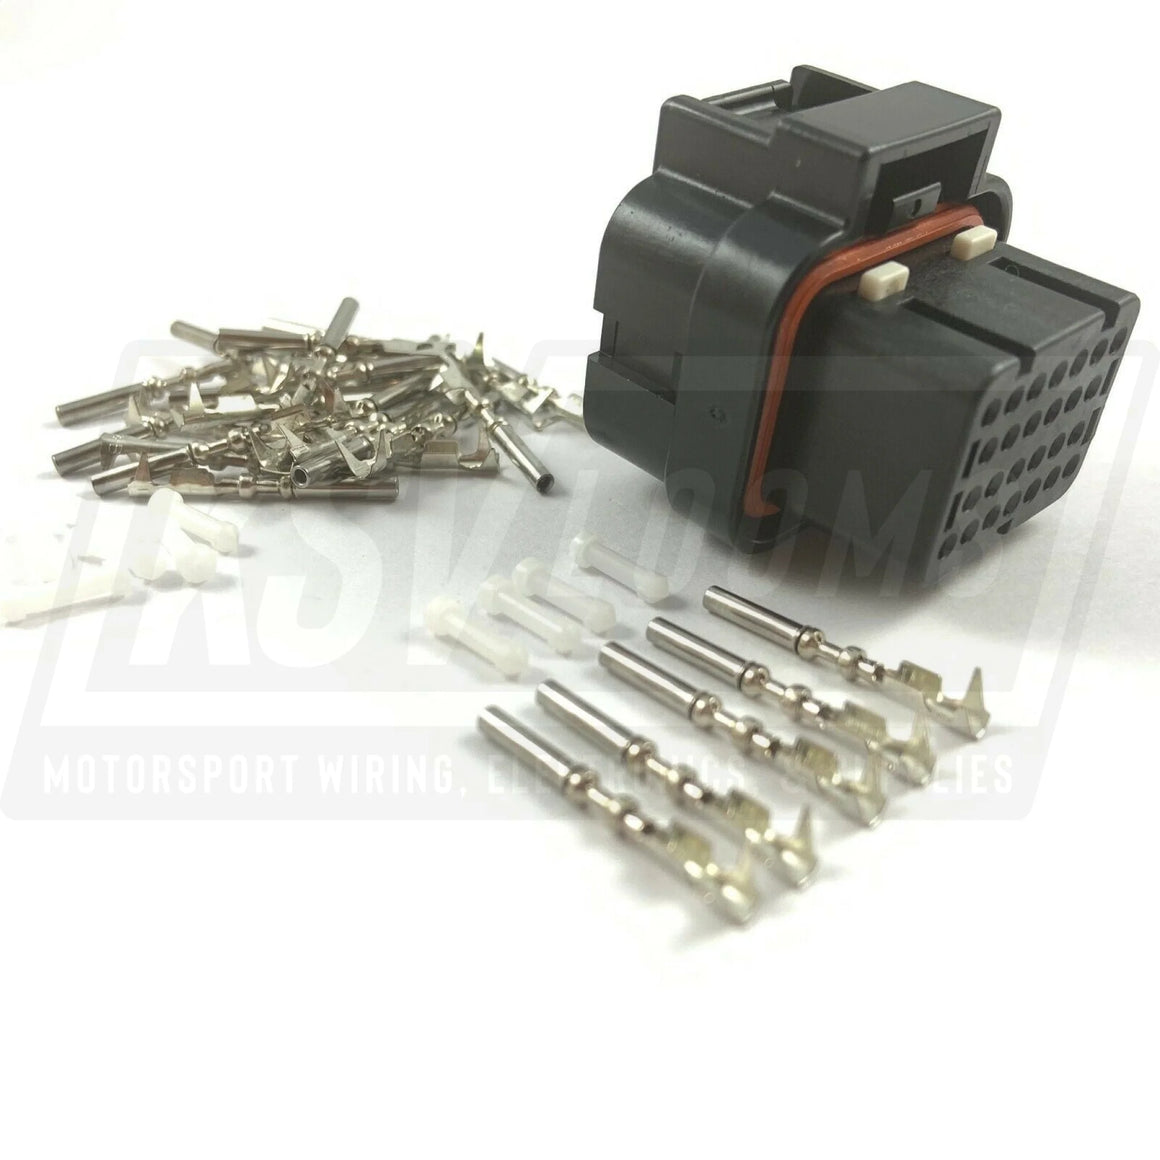 26-Way Connector Kit For Fueltech Ft450 Ecu (24-20 Awg)